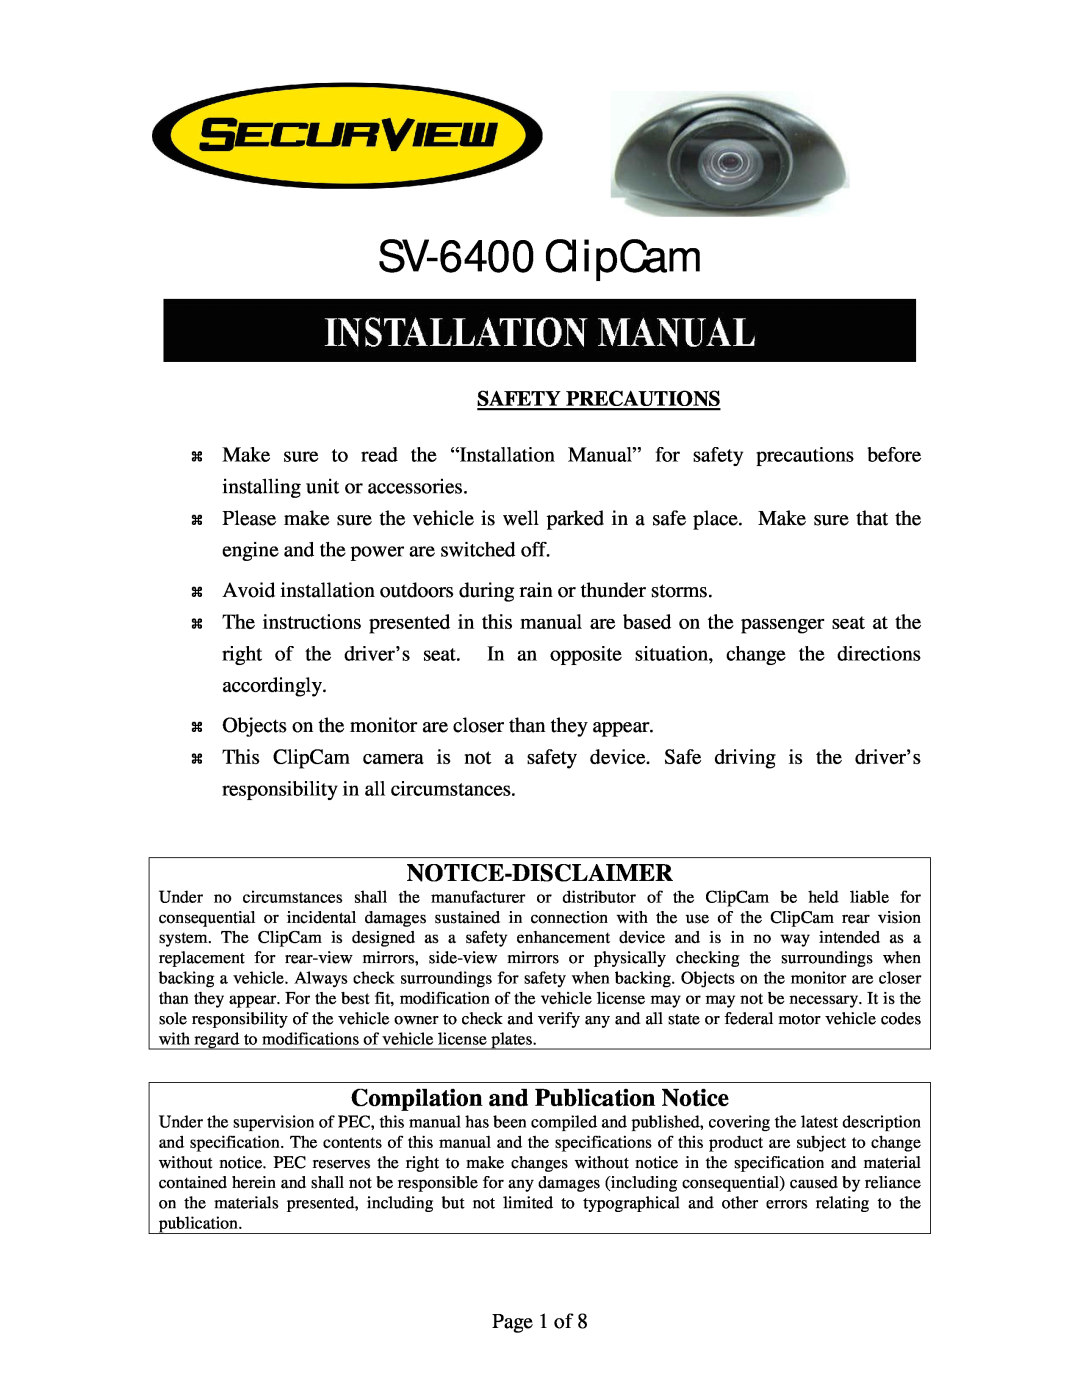 Crimestopper Security Products SV-6400 installation manual Notice-Disclaimer, Compilation and Publication Notice 